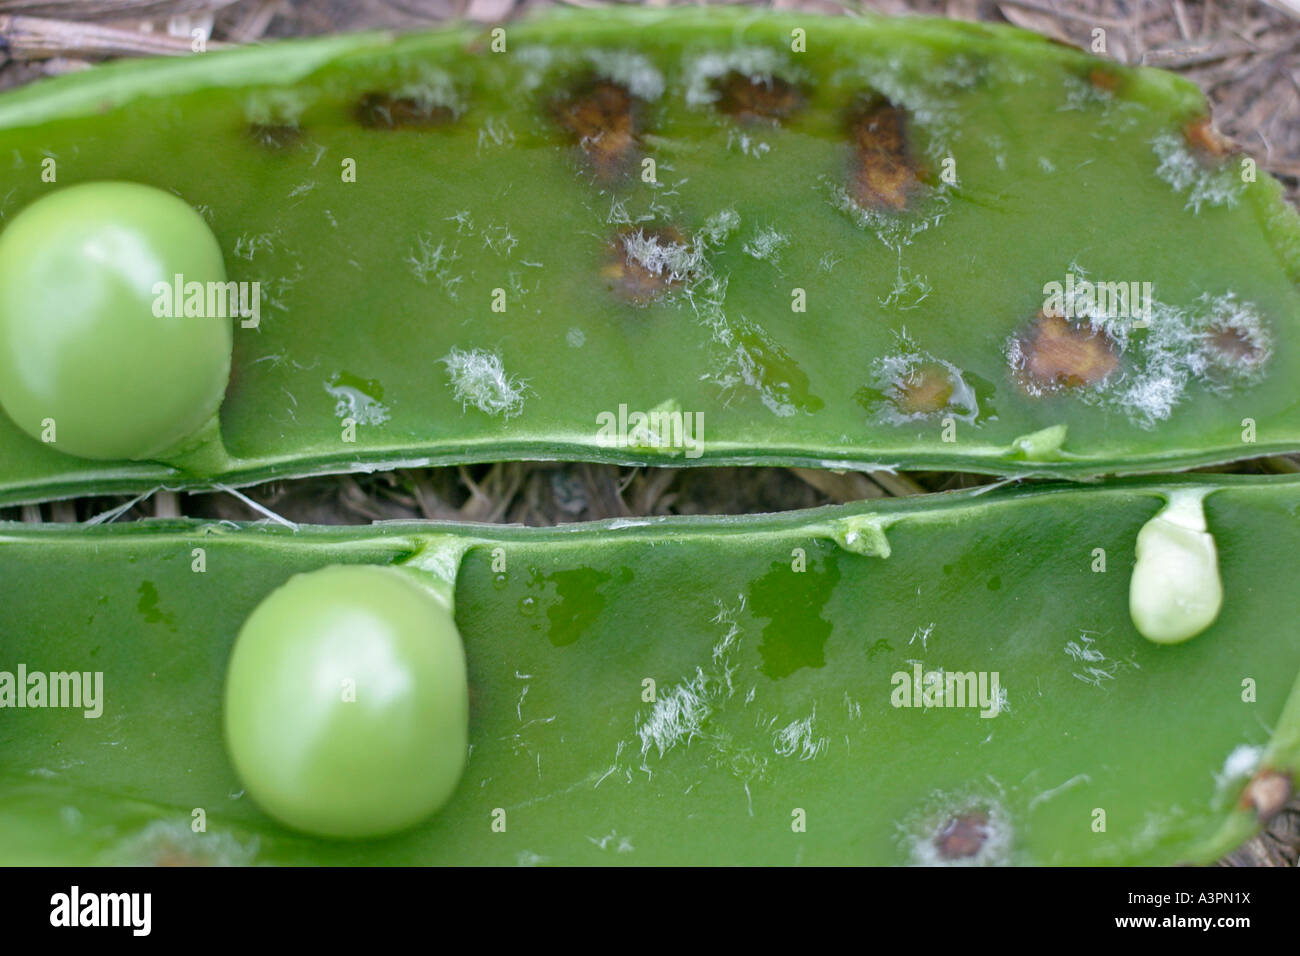 Pea leaf and pod spot Ascochyta pisi close up of open pod showing fungal hyphae Stock Photo